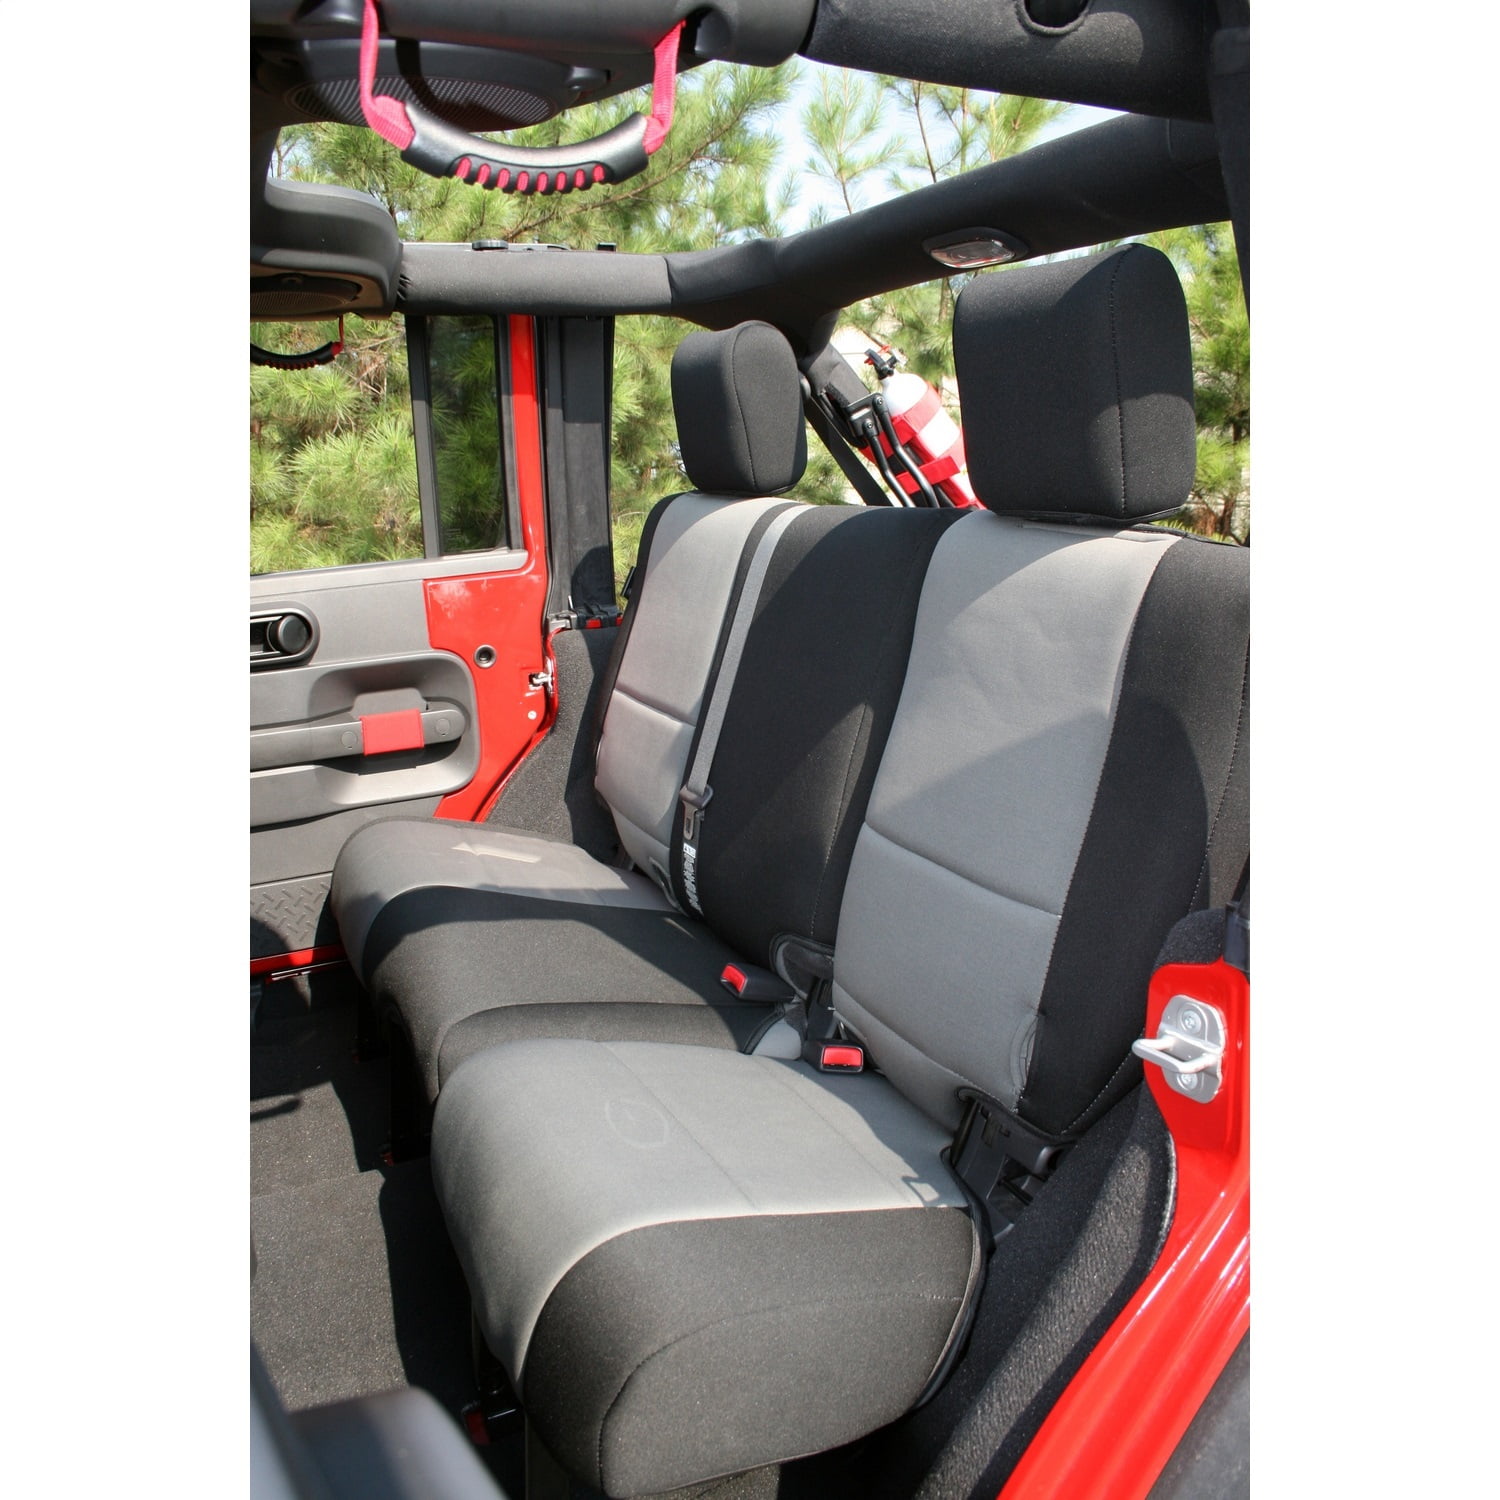 Rugged Ridge 13297.53 Black/Red Front & Rear Seat Covers for Wrangler JKU 4-Dr 